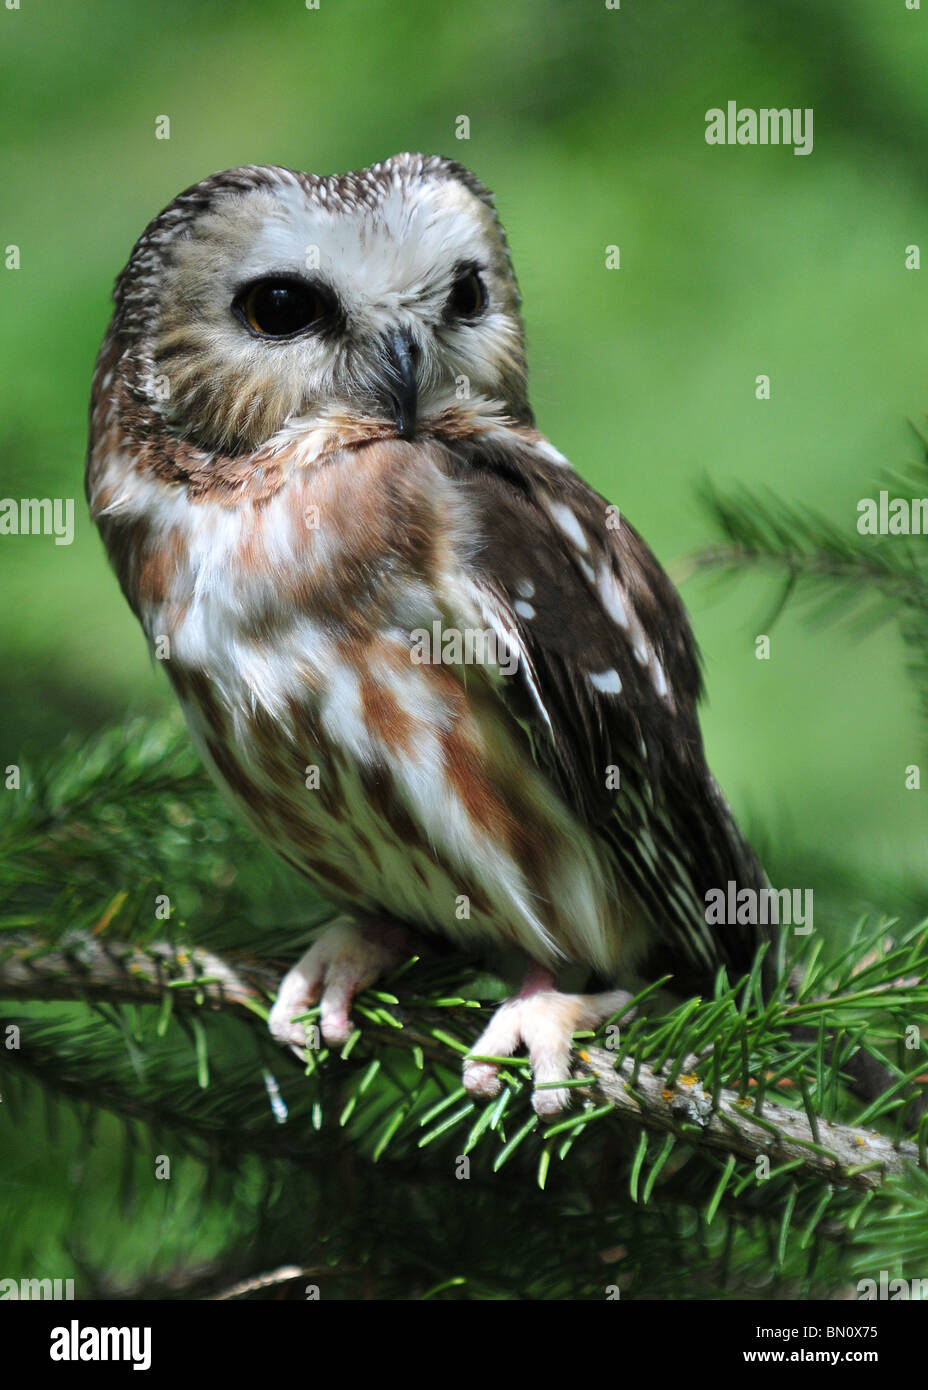 A small Saw-Whet Owl sitting in a pine tree Stock Photo